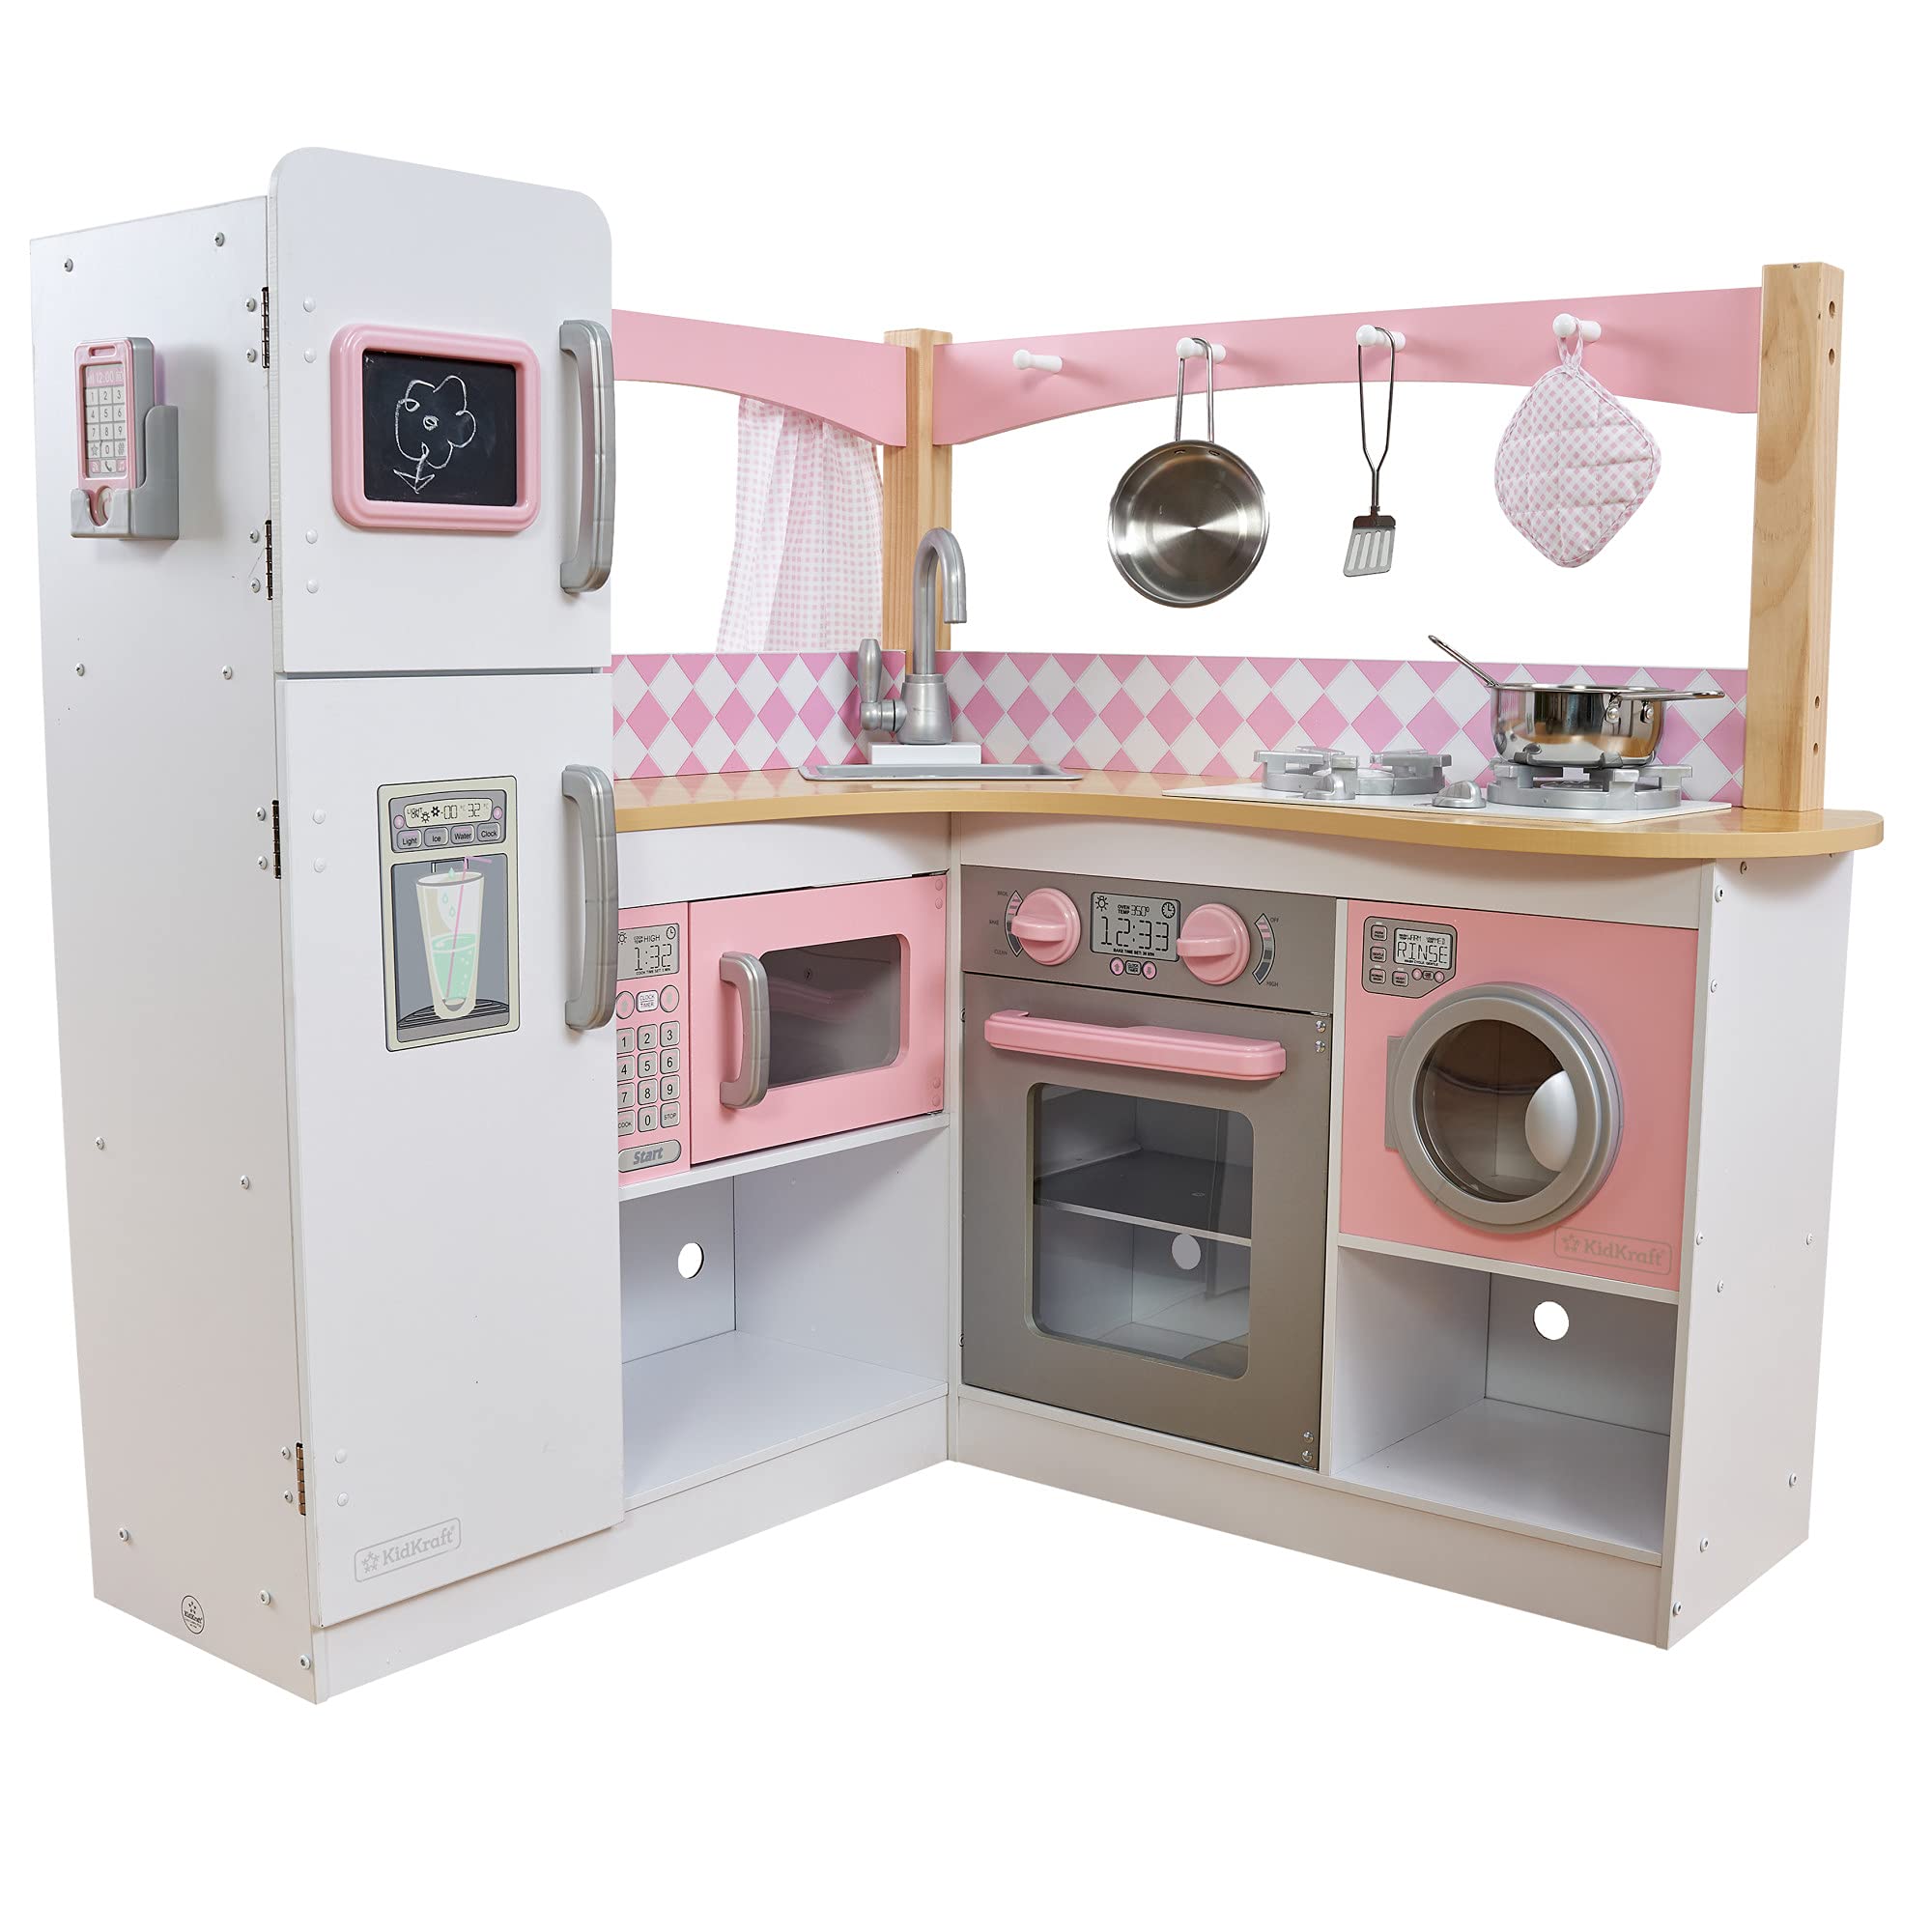 KidKraft Grand Gourmet Corner Play Kitchen with 5 Accessories - image 1 of 7